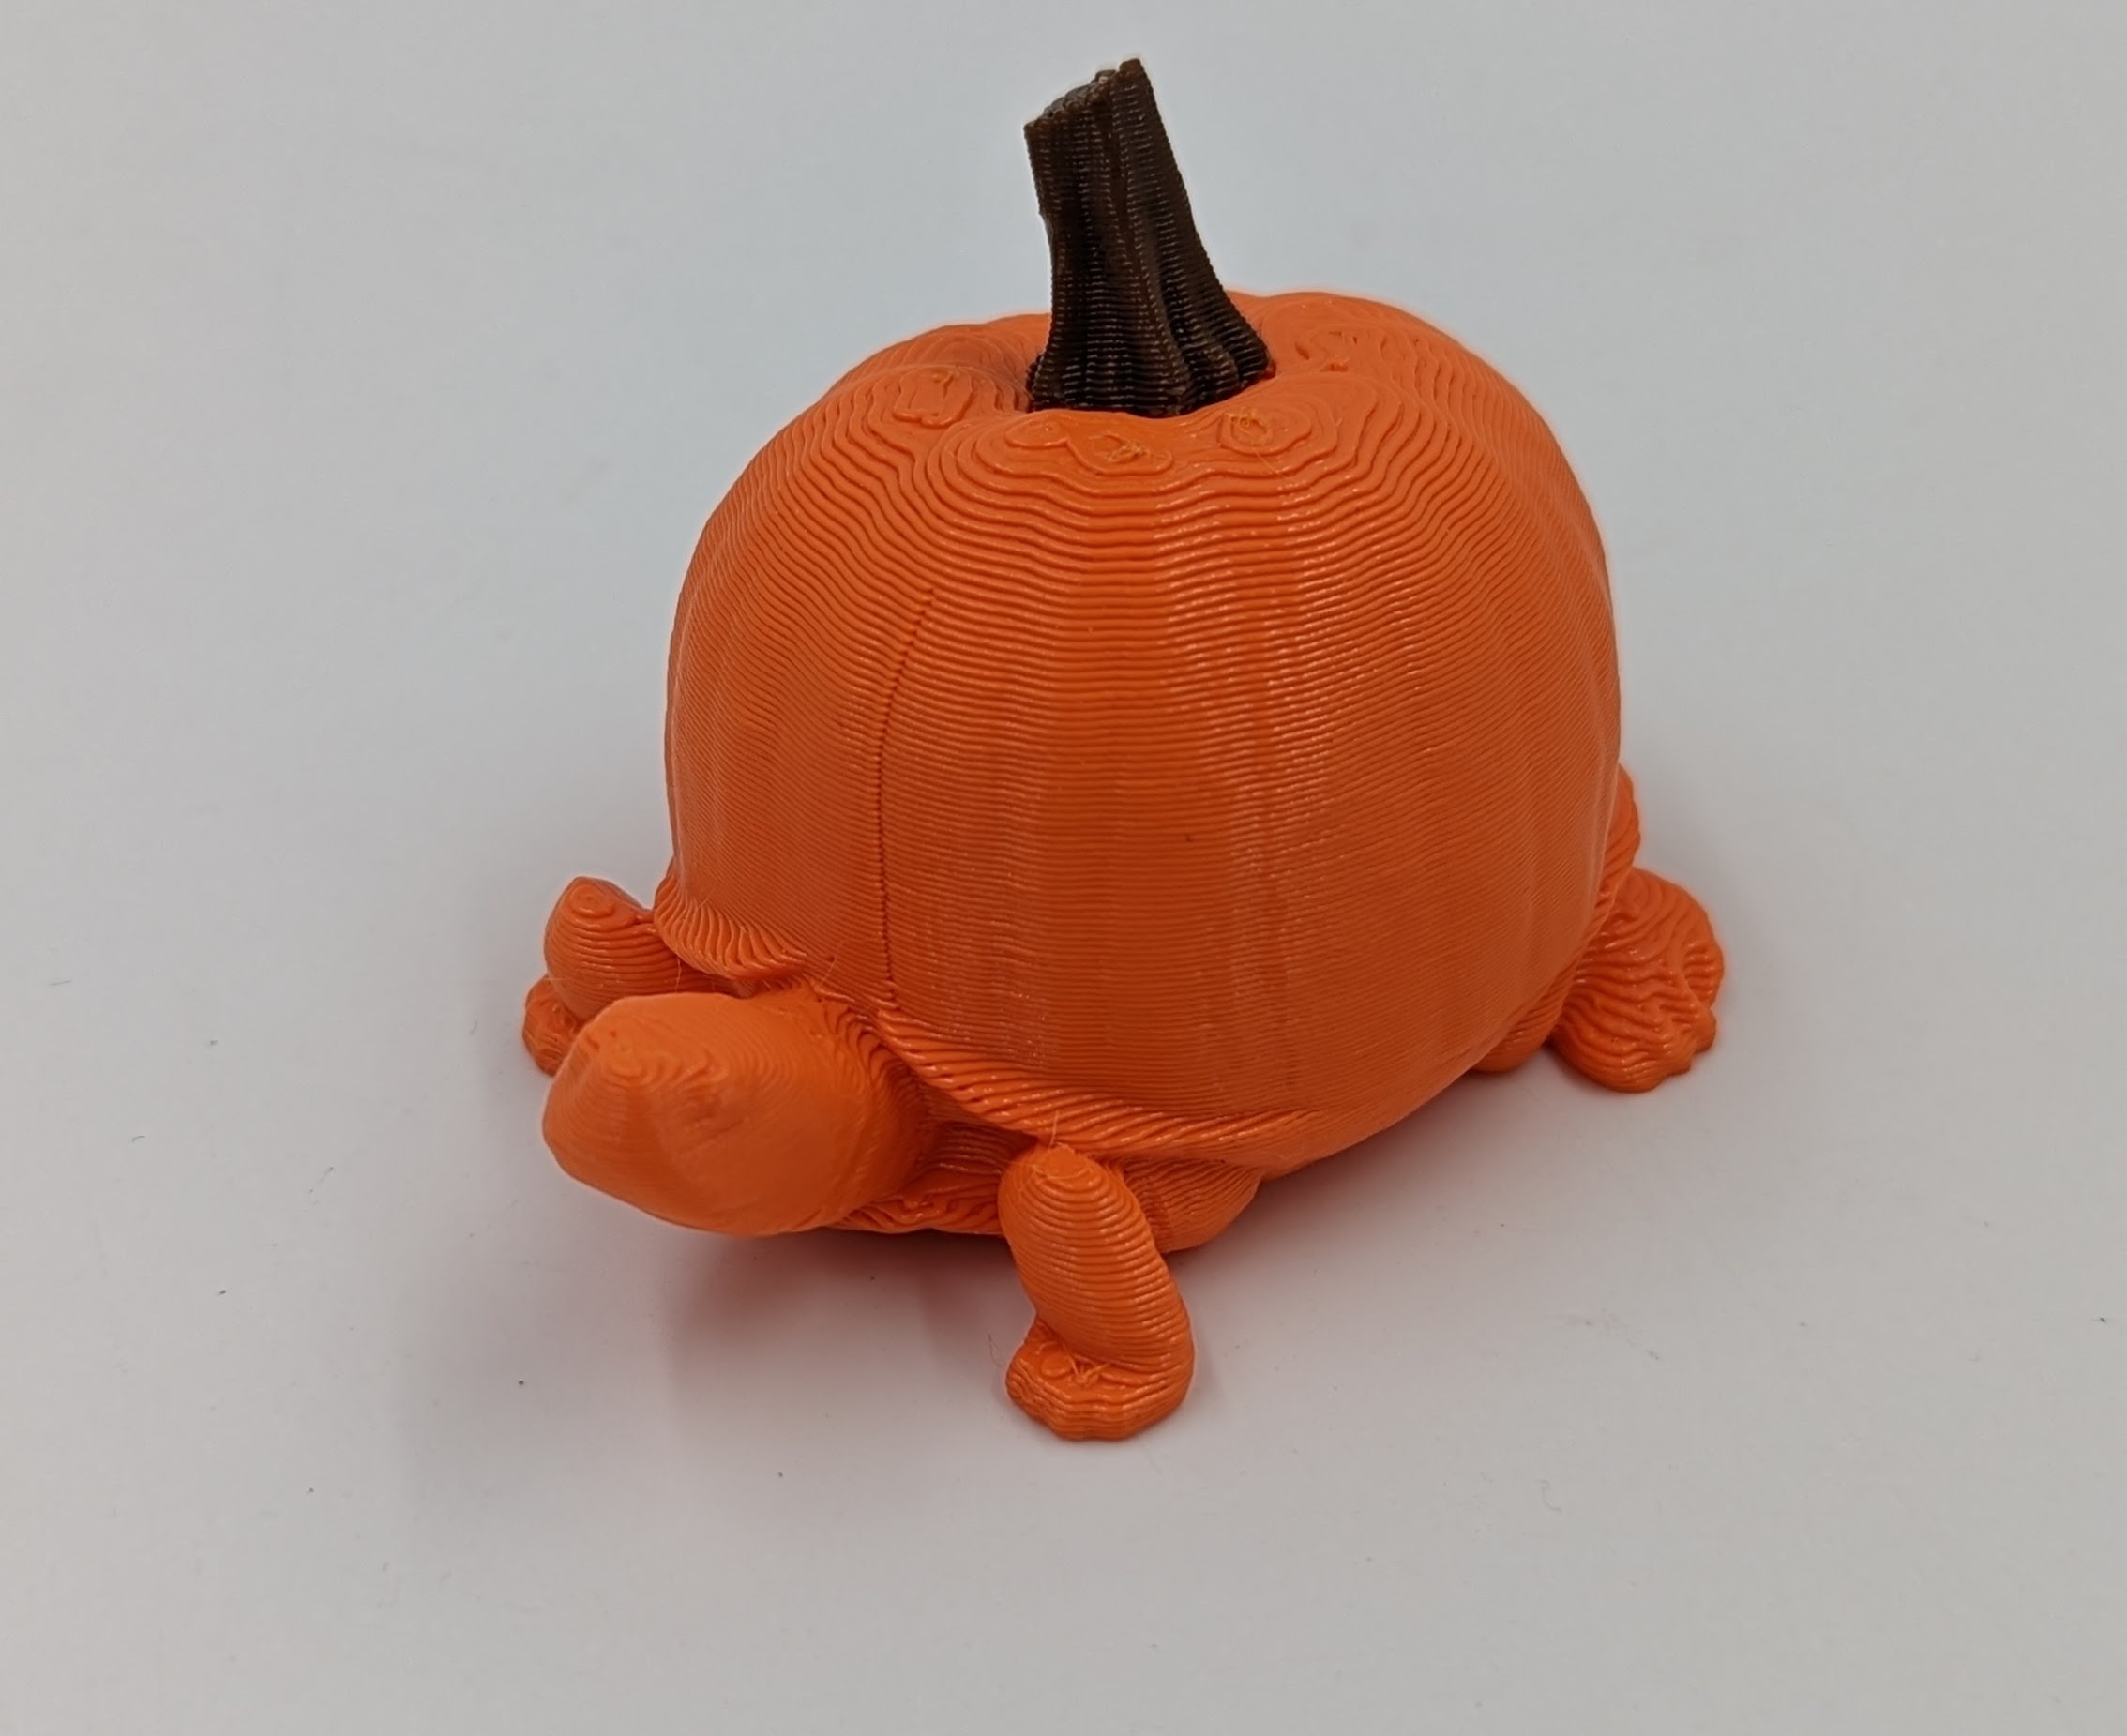 A terrapin with a pumpkin instead of a shell, 3D printed in orange filament, with a brown stem.